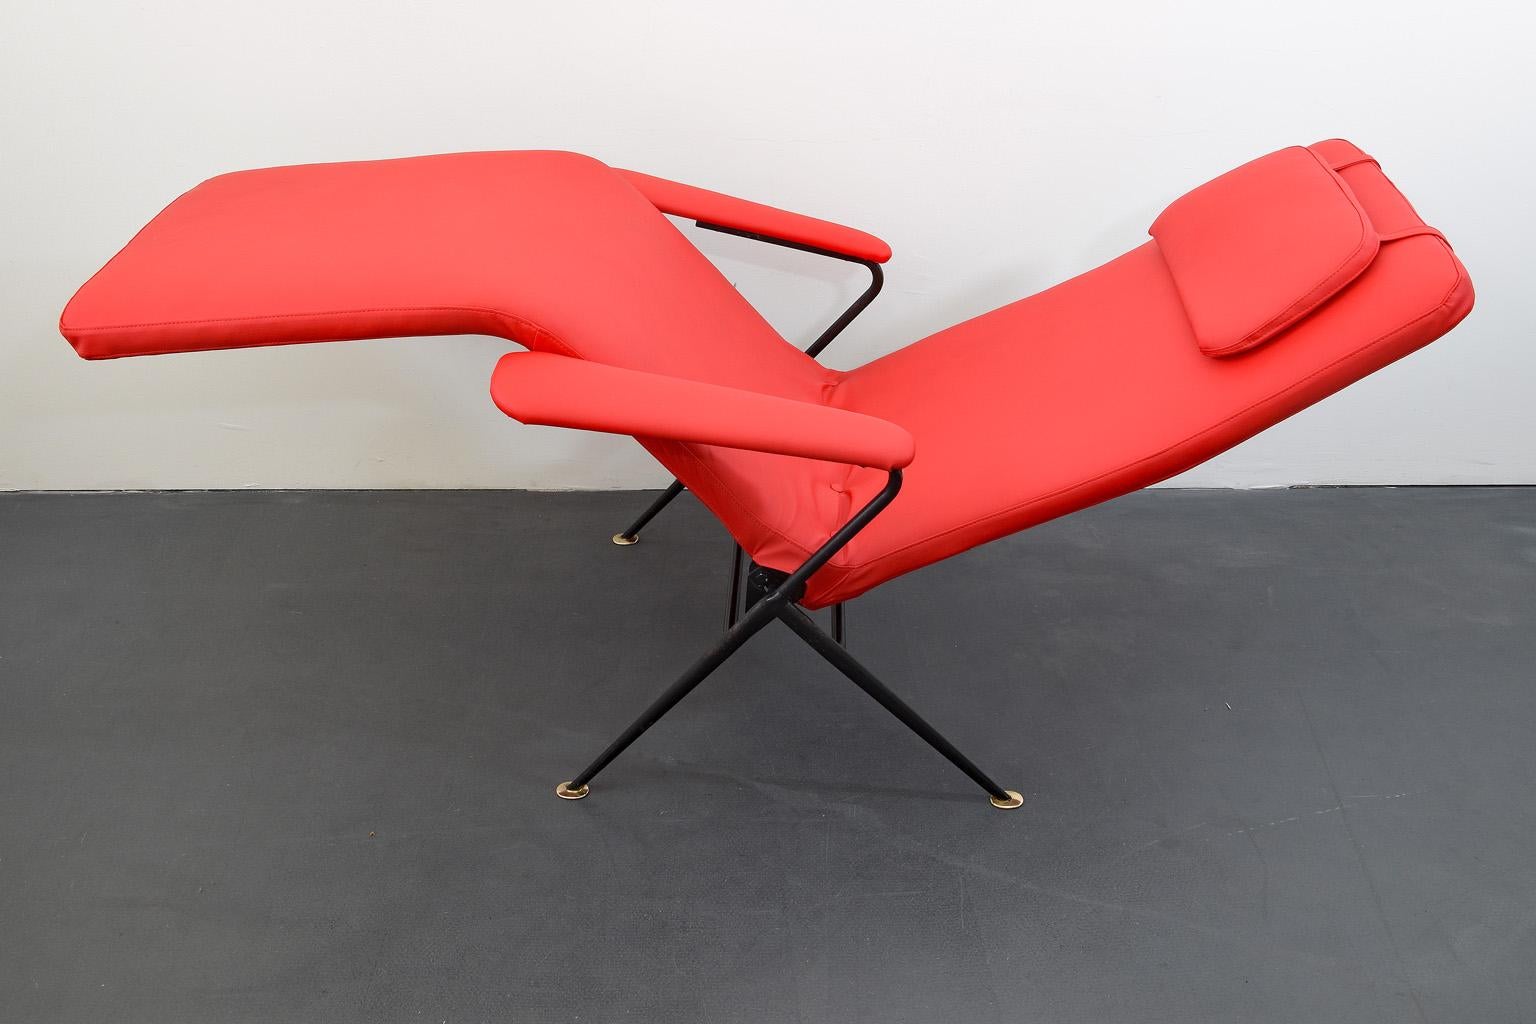 Sunlounger / Deckchair in Red, Chaise Lounge / Capri Lounger, Italy, 1950s In Good Condition For Sale In Nürnberg, Bavaria